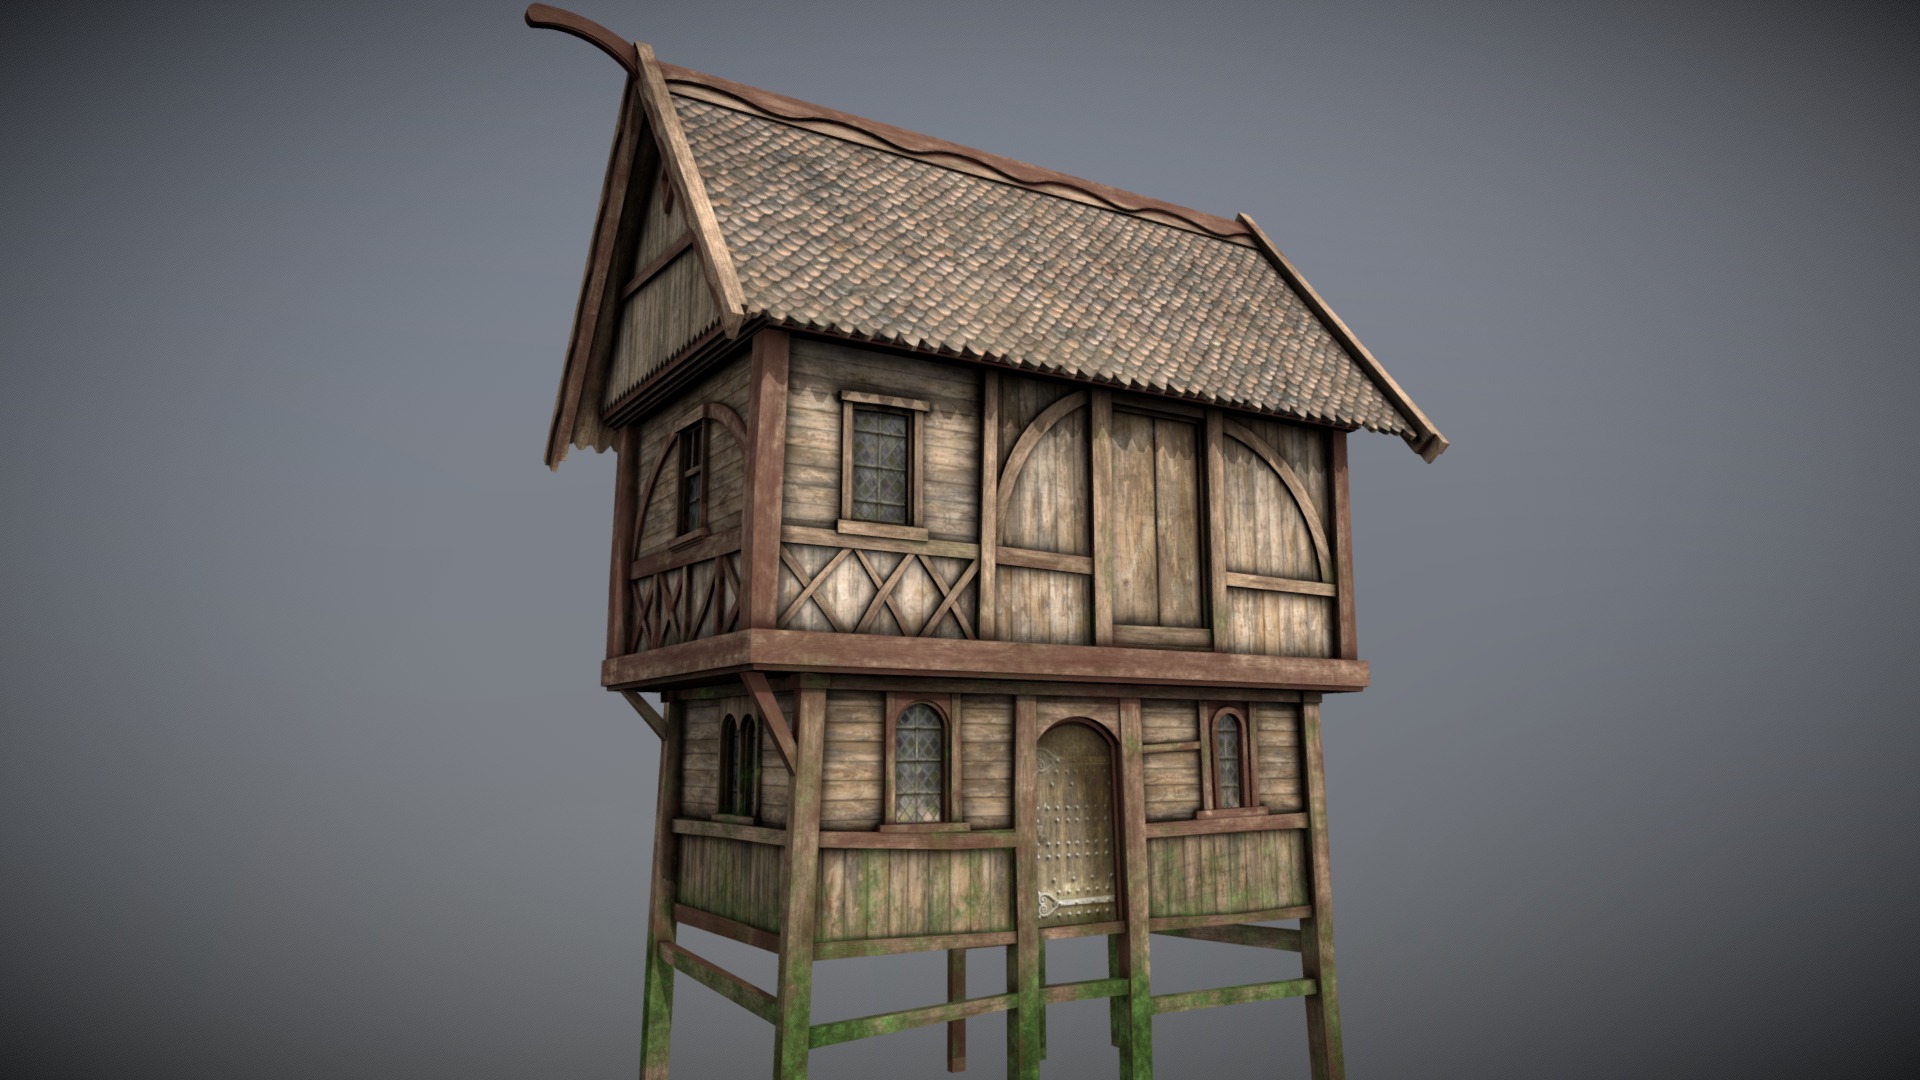 3D model Medieval lake village – House 16 - This is a 3D model of the Medieval lake village - House 16. The 3D model is about a wooden house on a stand.